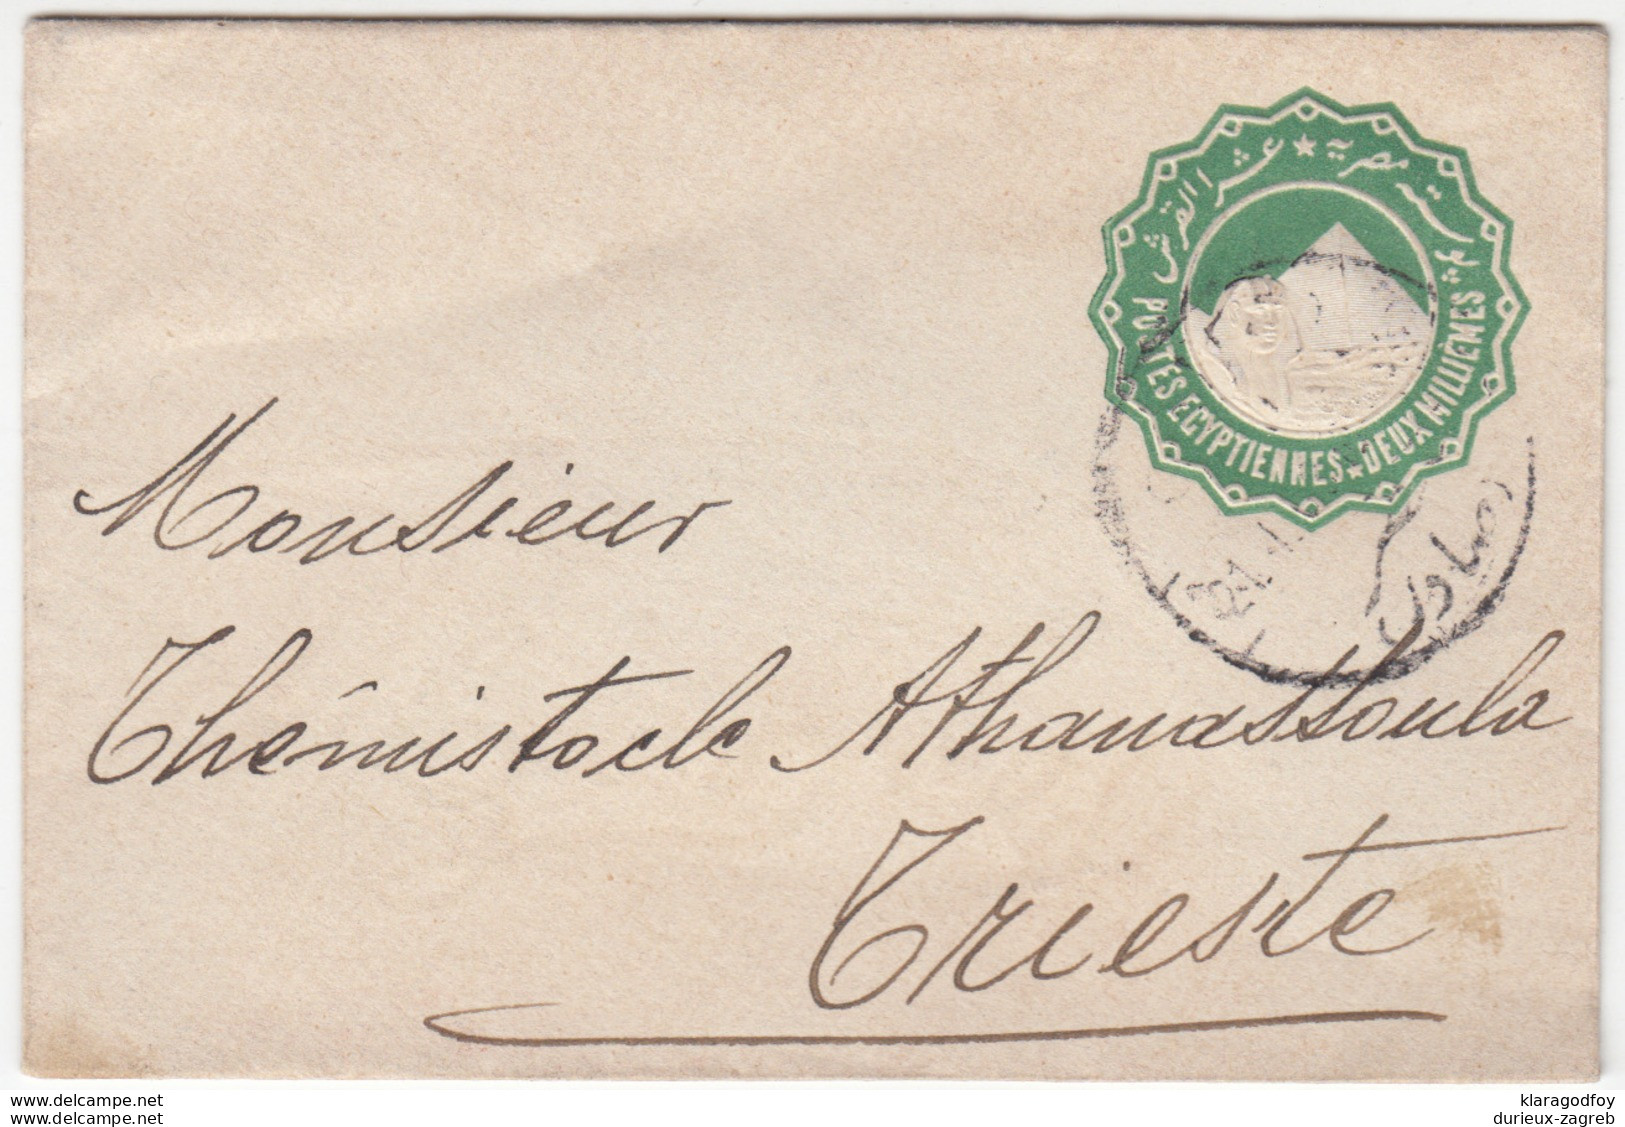 Egypt Postal Stationary Letter Cover Travelled To Trieste B170310 - 1915-1921 British Protectorate